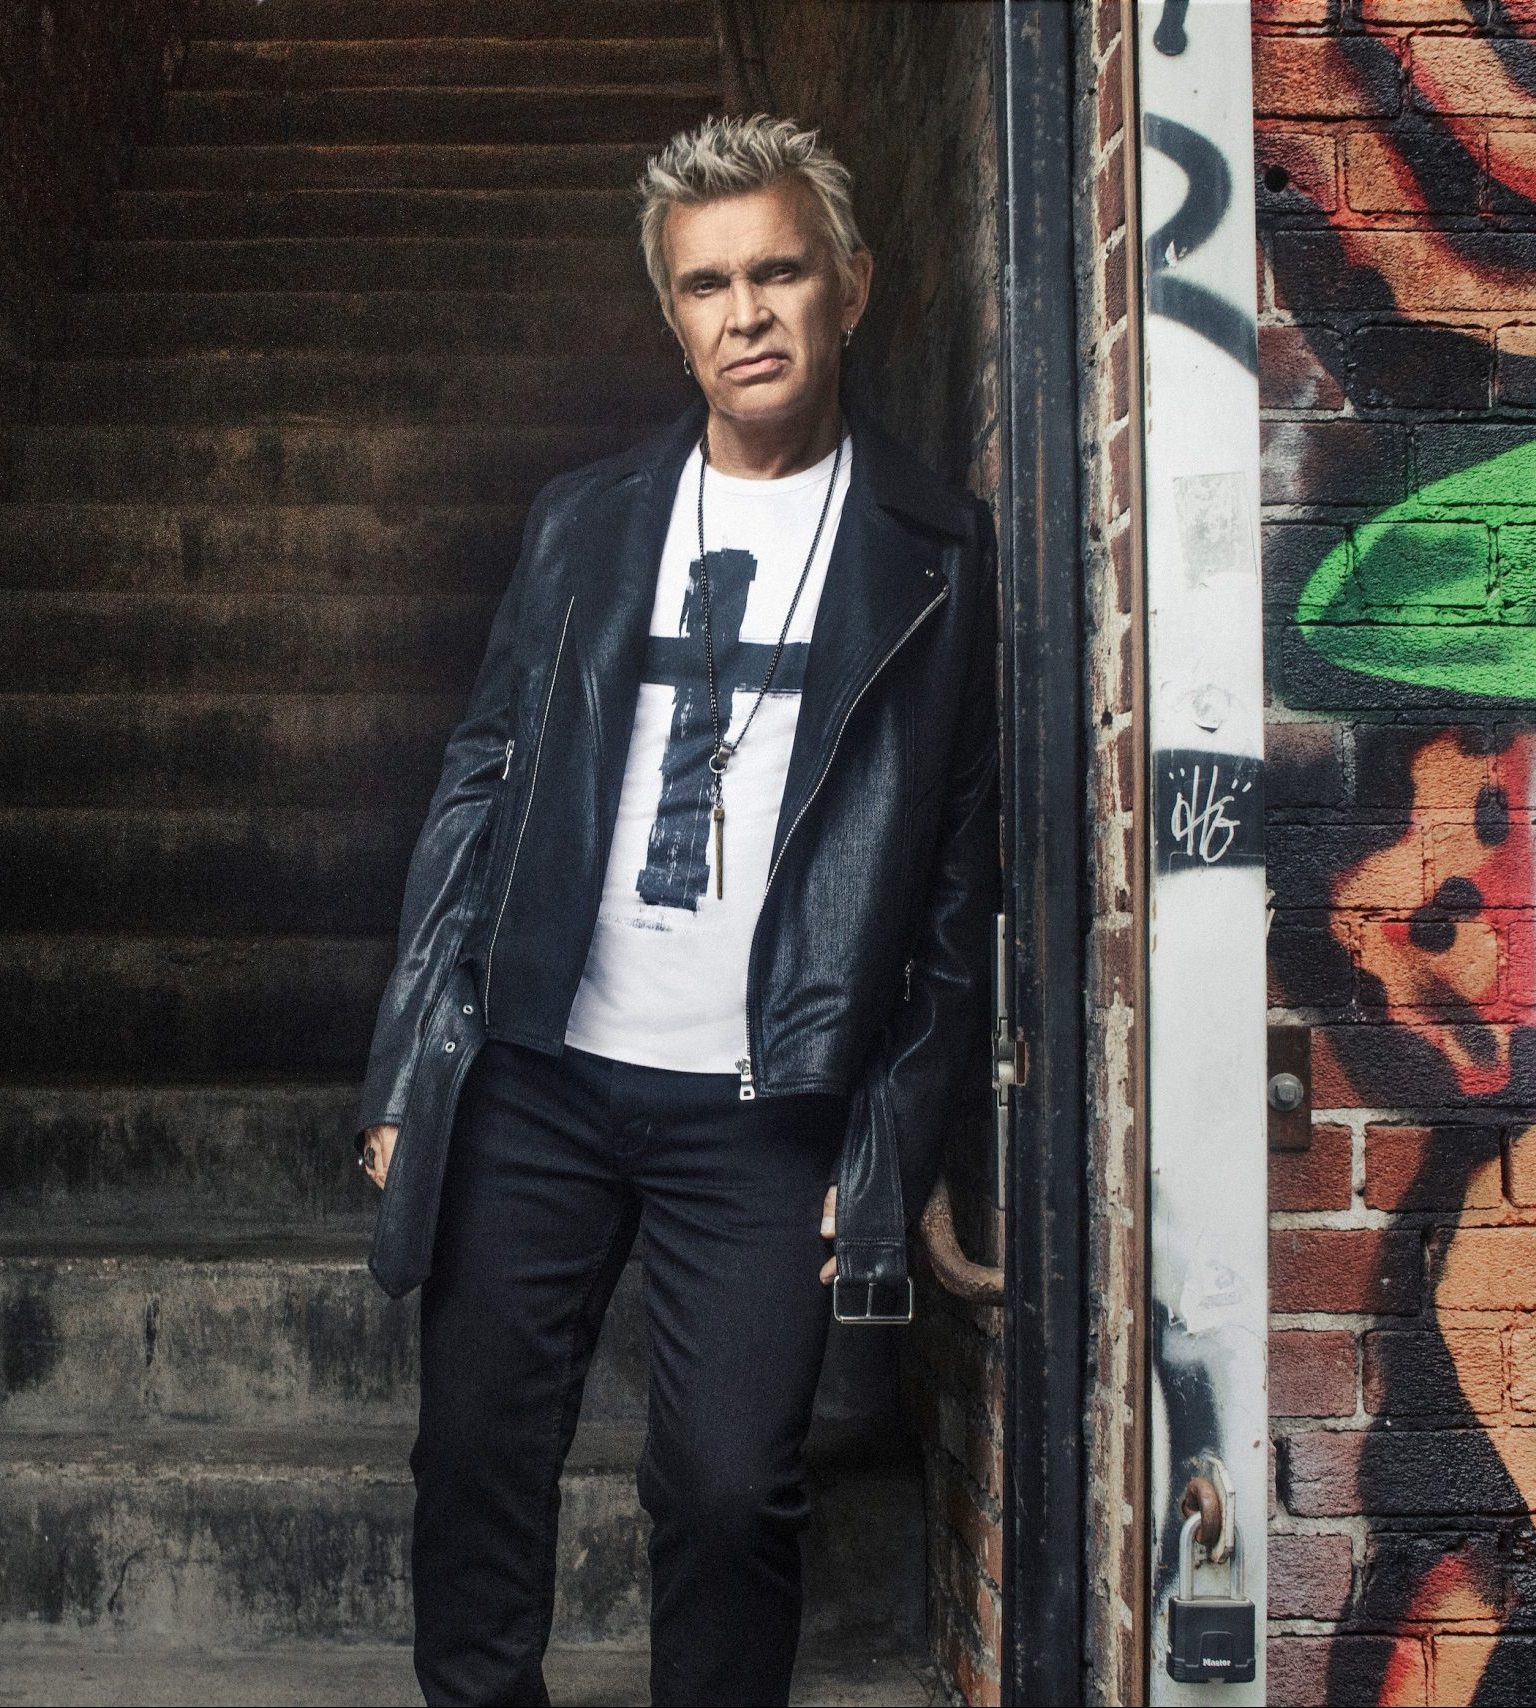 BILLY IDOL TO BE HONORED WITH FIRST HOLLYWOOD WALK OF FAME STAR OF 2023